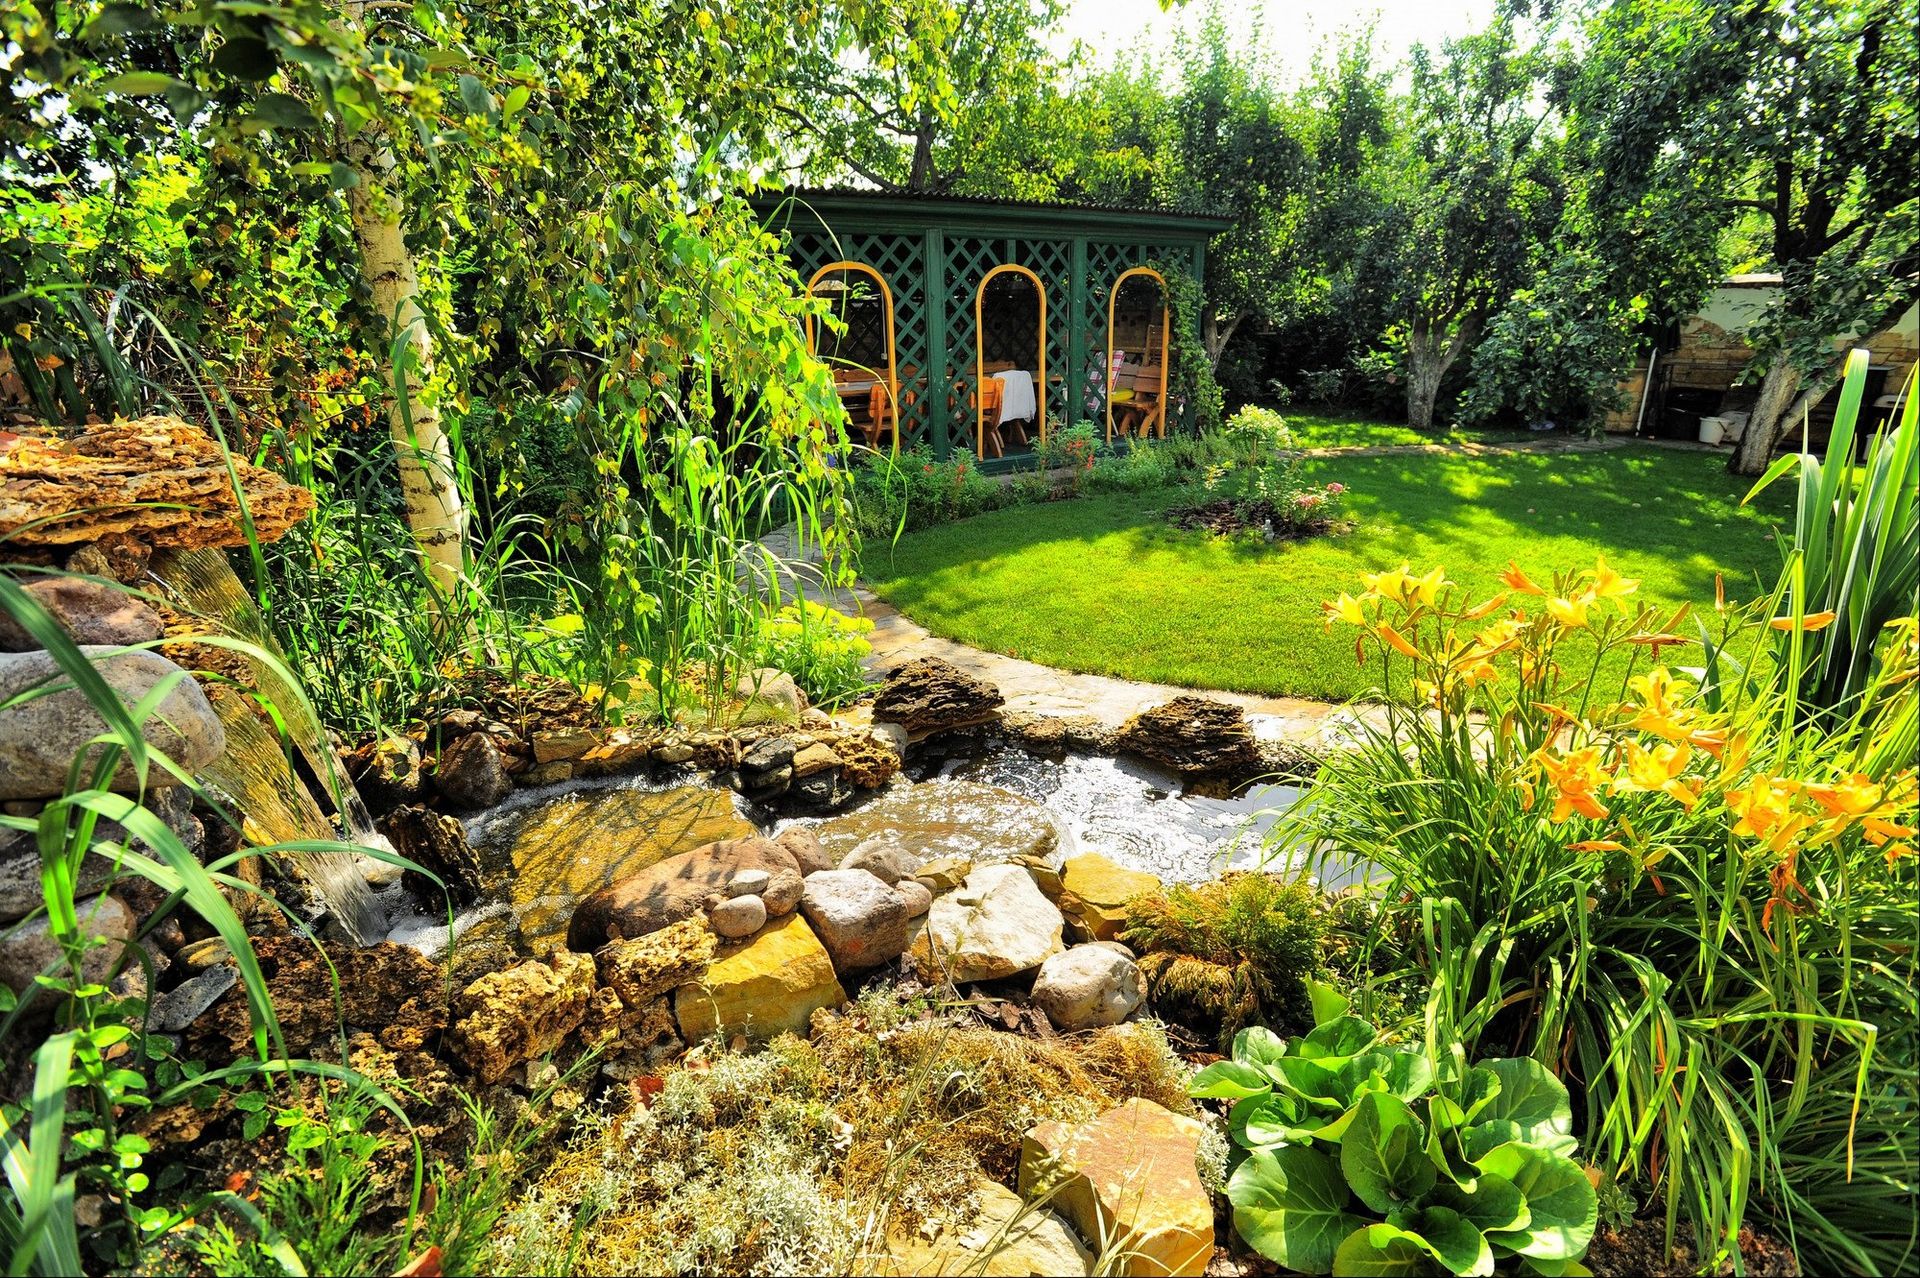 A green Summer house in a garden with curved lawn and water feature